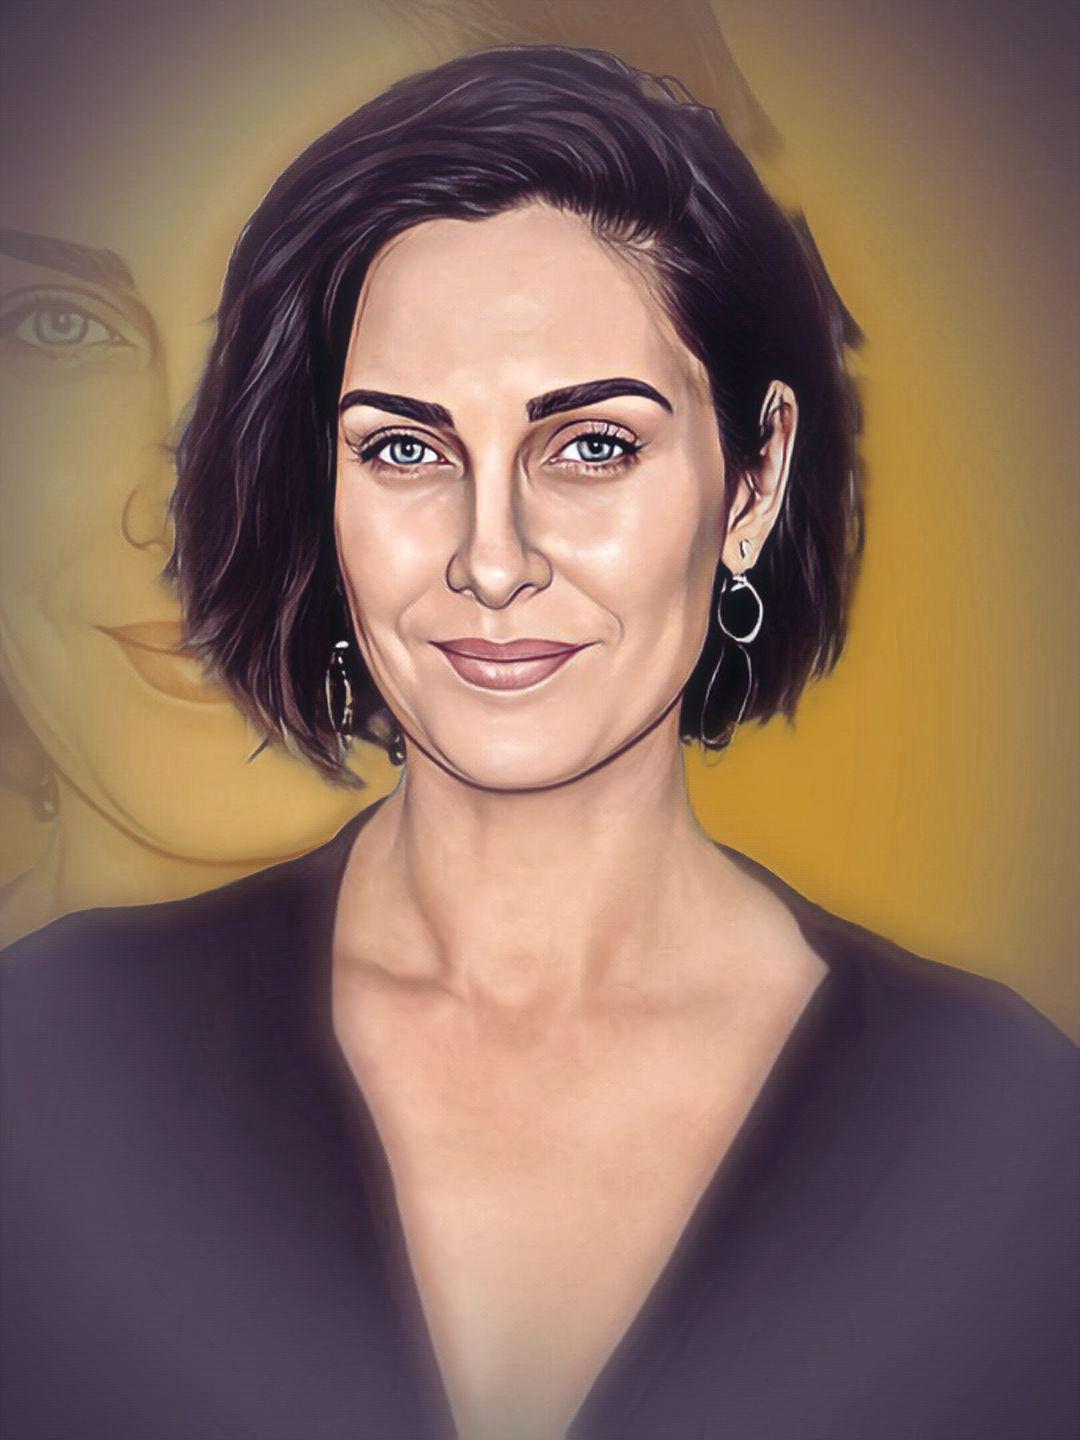 Anjelica Lesbian Threesome - Carrie-Anne Moss - Celeb ART - Beautiful Artworks of Celebrities,  Footballers, Politicians and Famous People in World | OpenSea